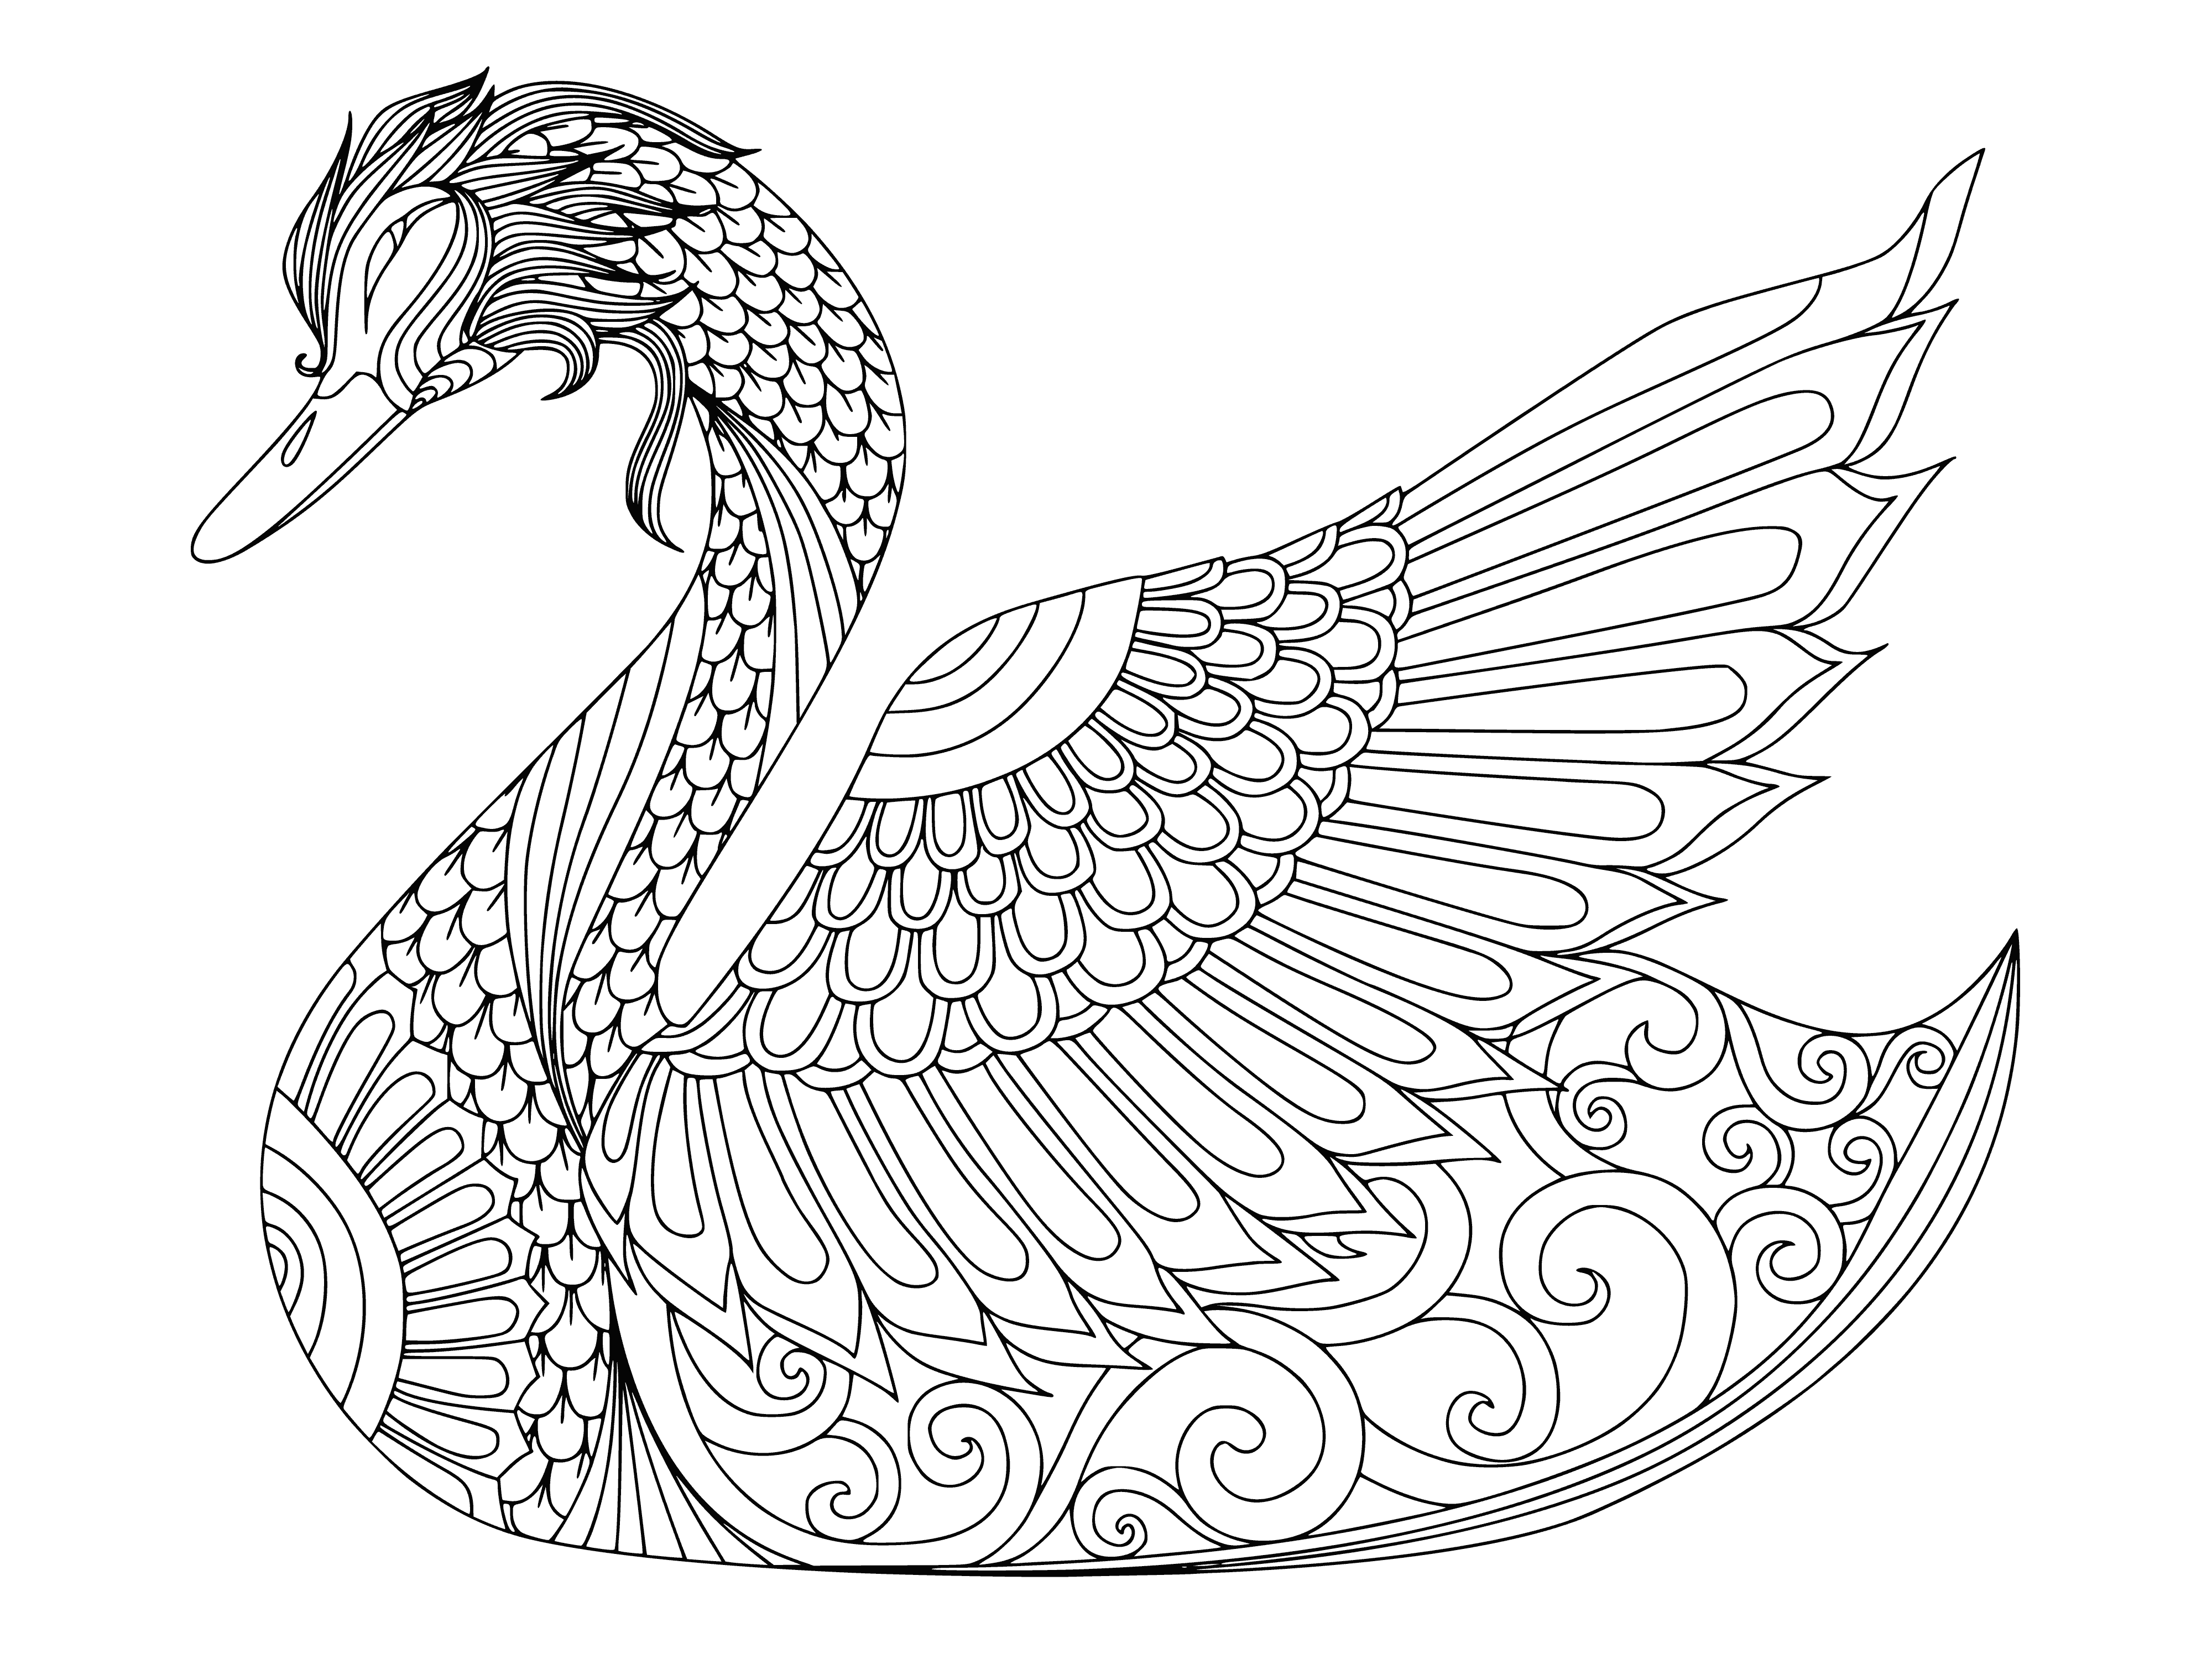 coloring page: Swan peacefully glides in lake with curved neck, white feathers and black beak, looking calm and serene.